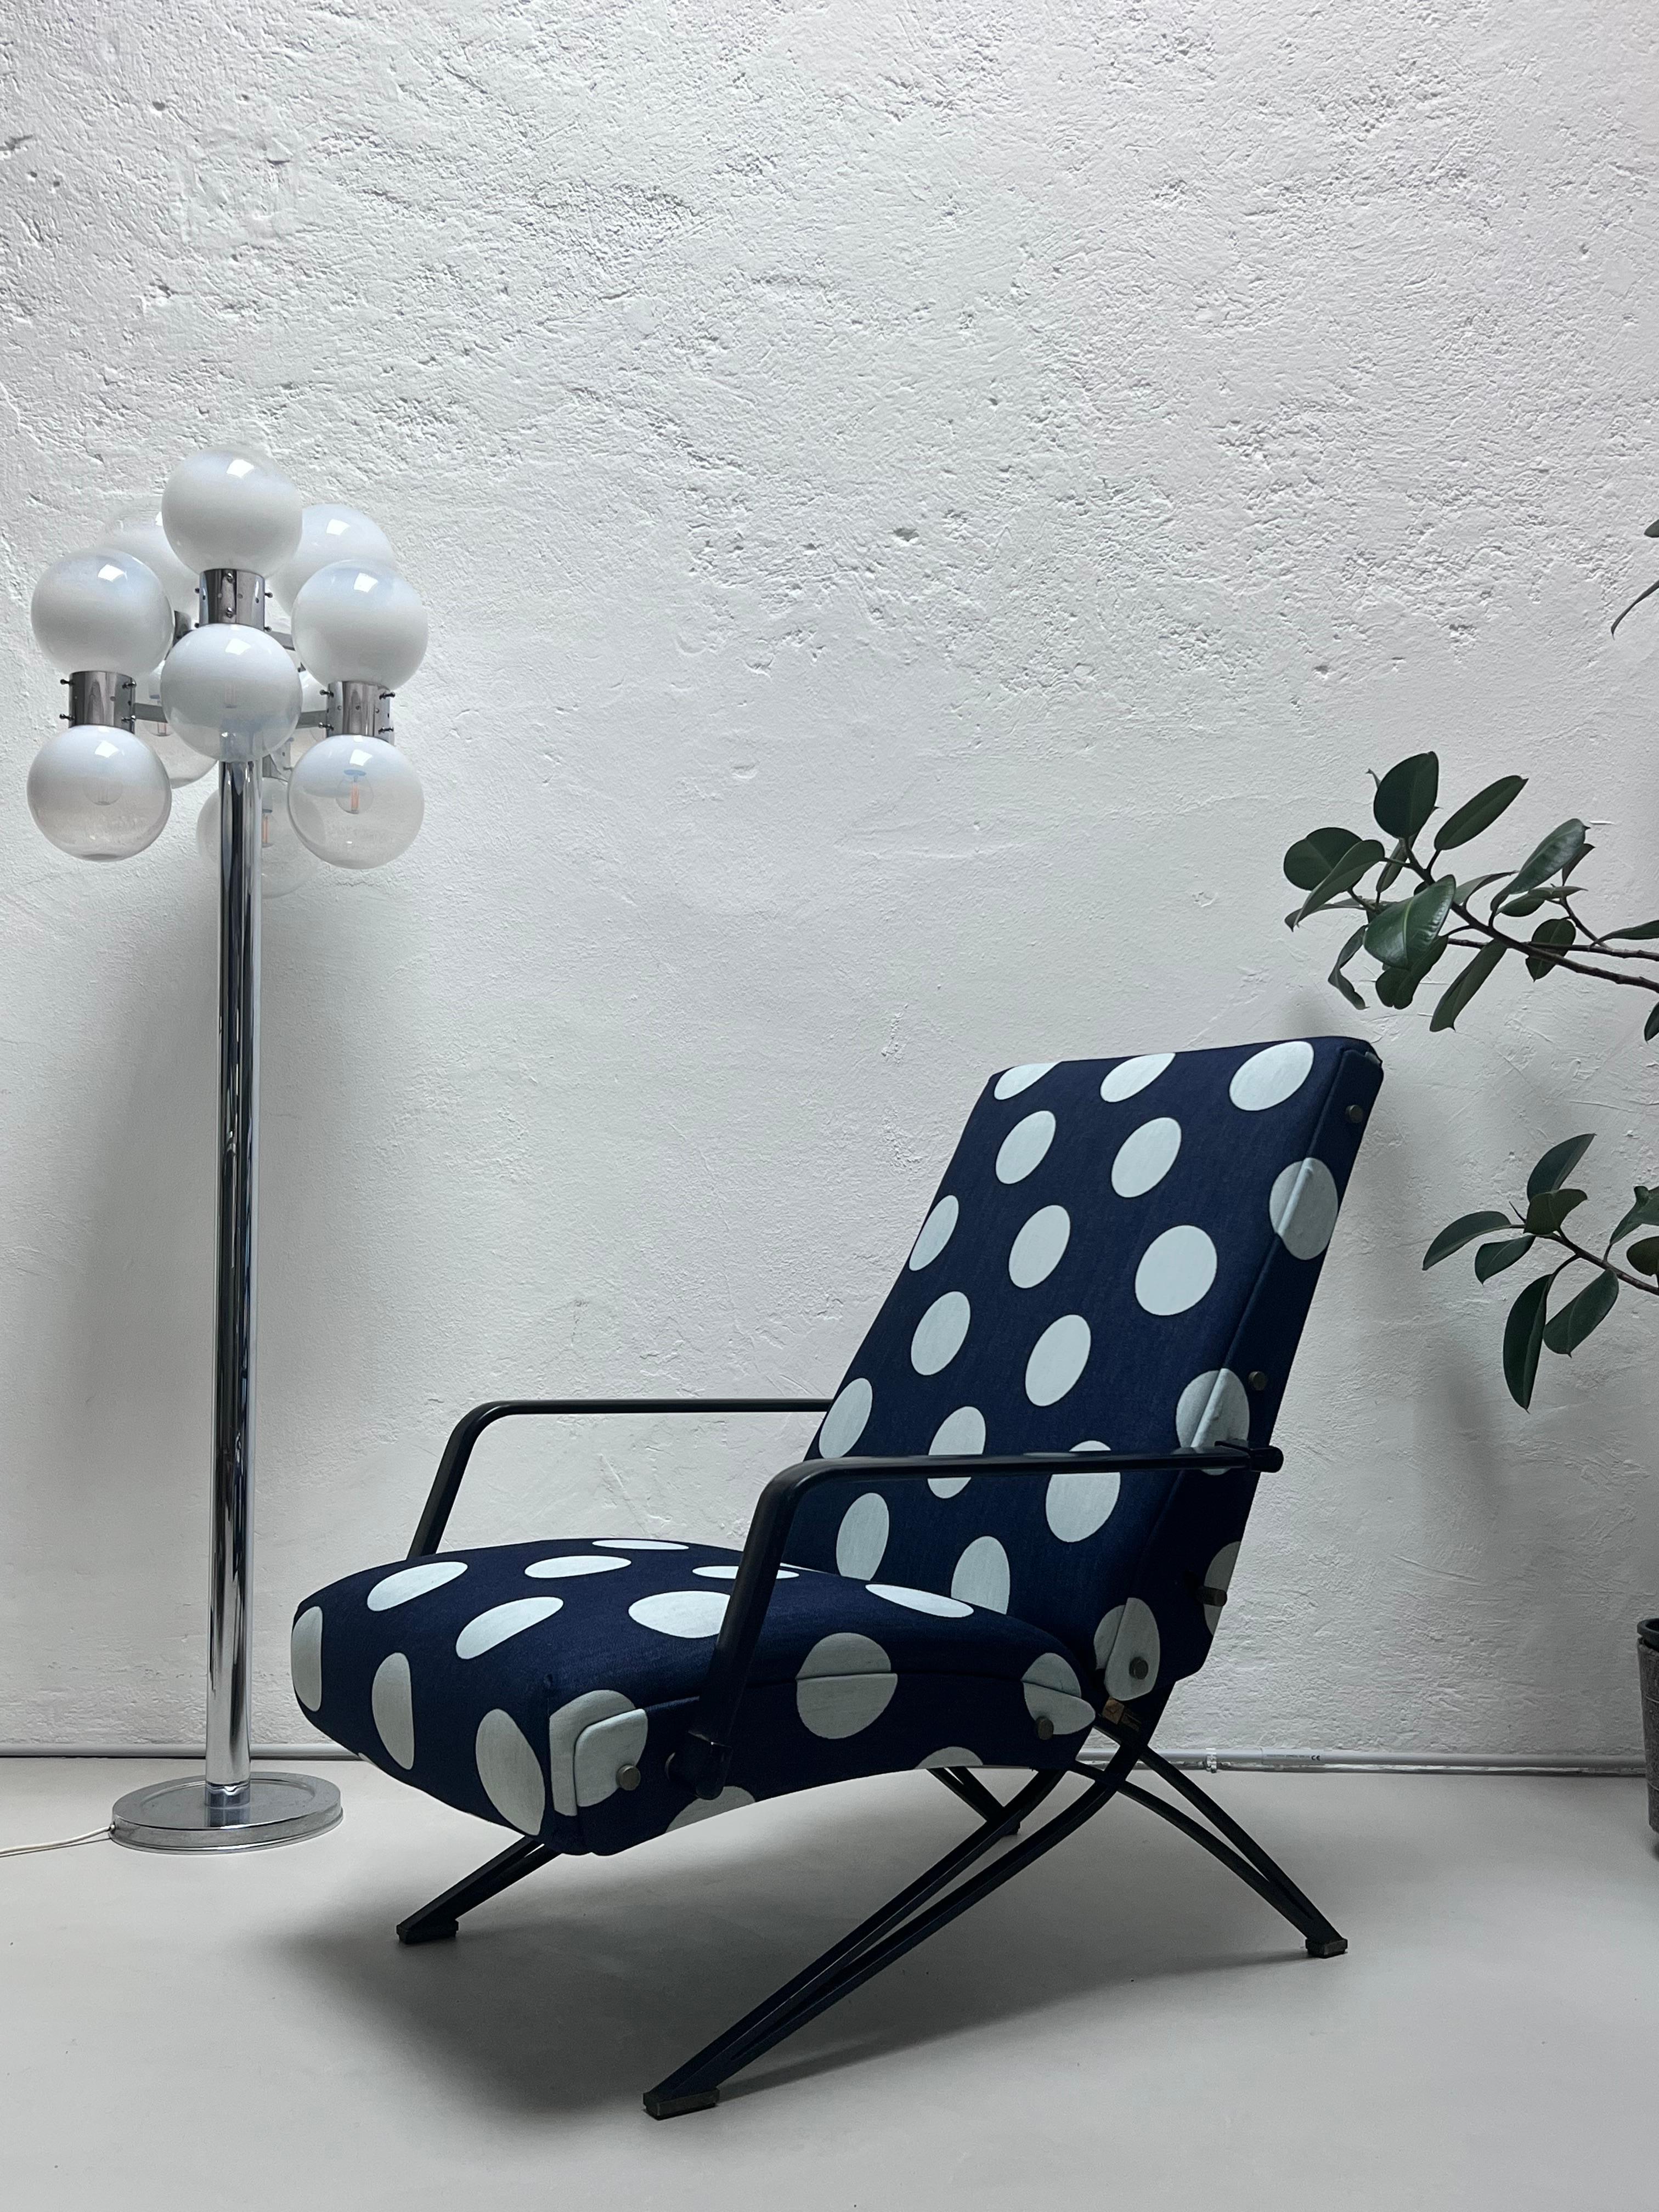 Vintage 1960s Formanova reclining lounge chair designed by Giulio Moscatelli, recently professionally reupholstered with polka dot denim-like fabric. 

Possibly modeled after Osvaldo Borsani's P40 lounge chair, designed for Tecno around a decade